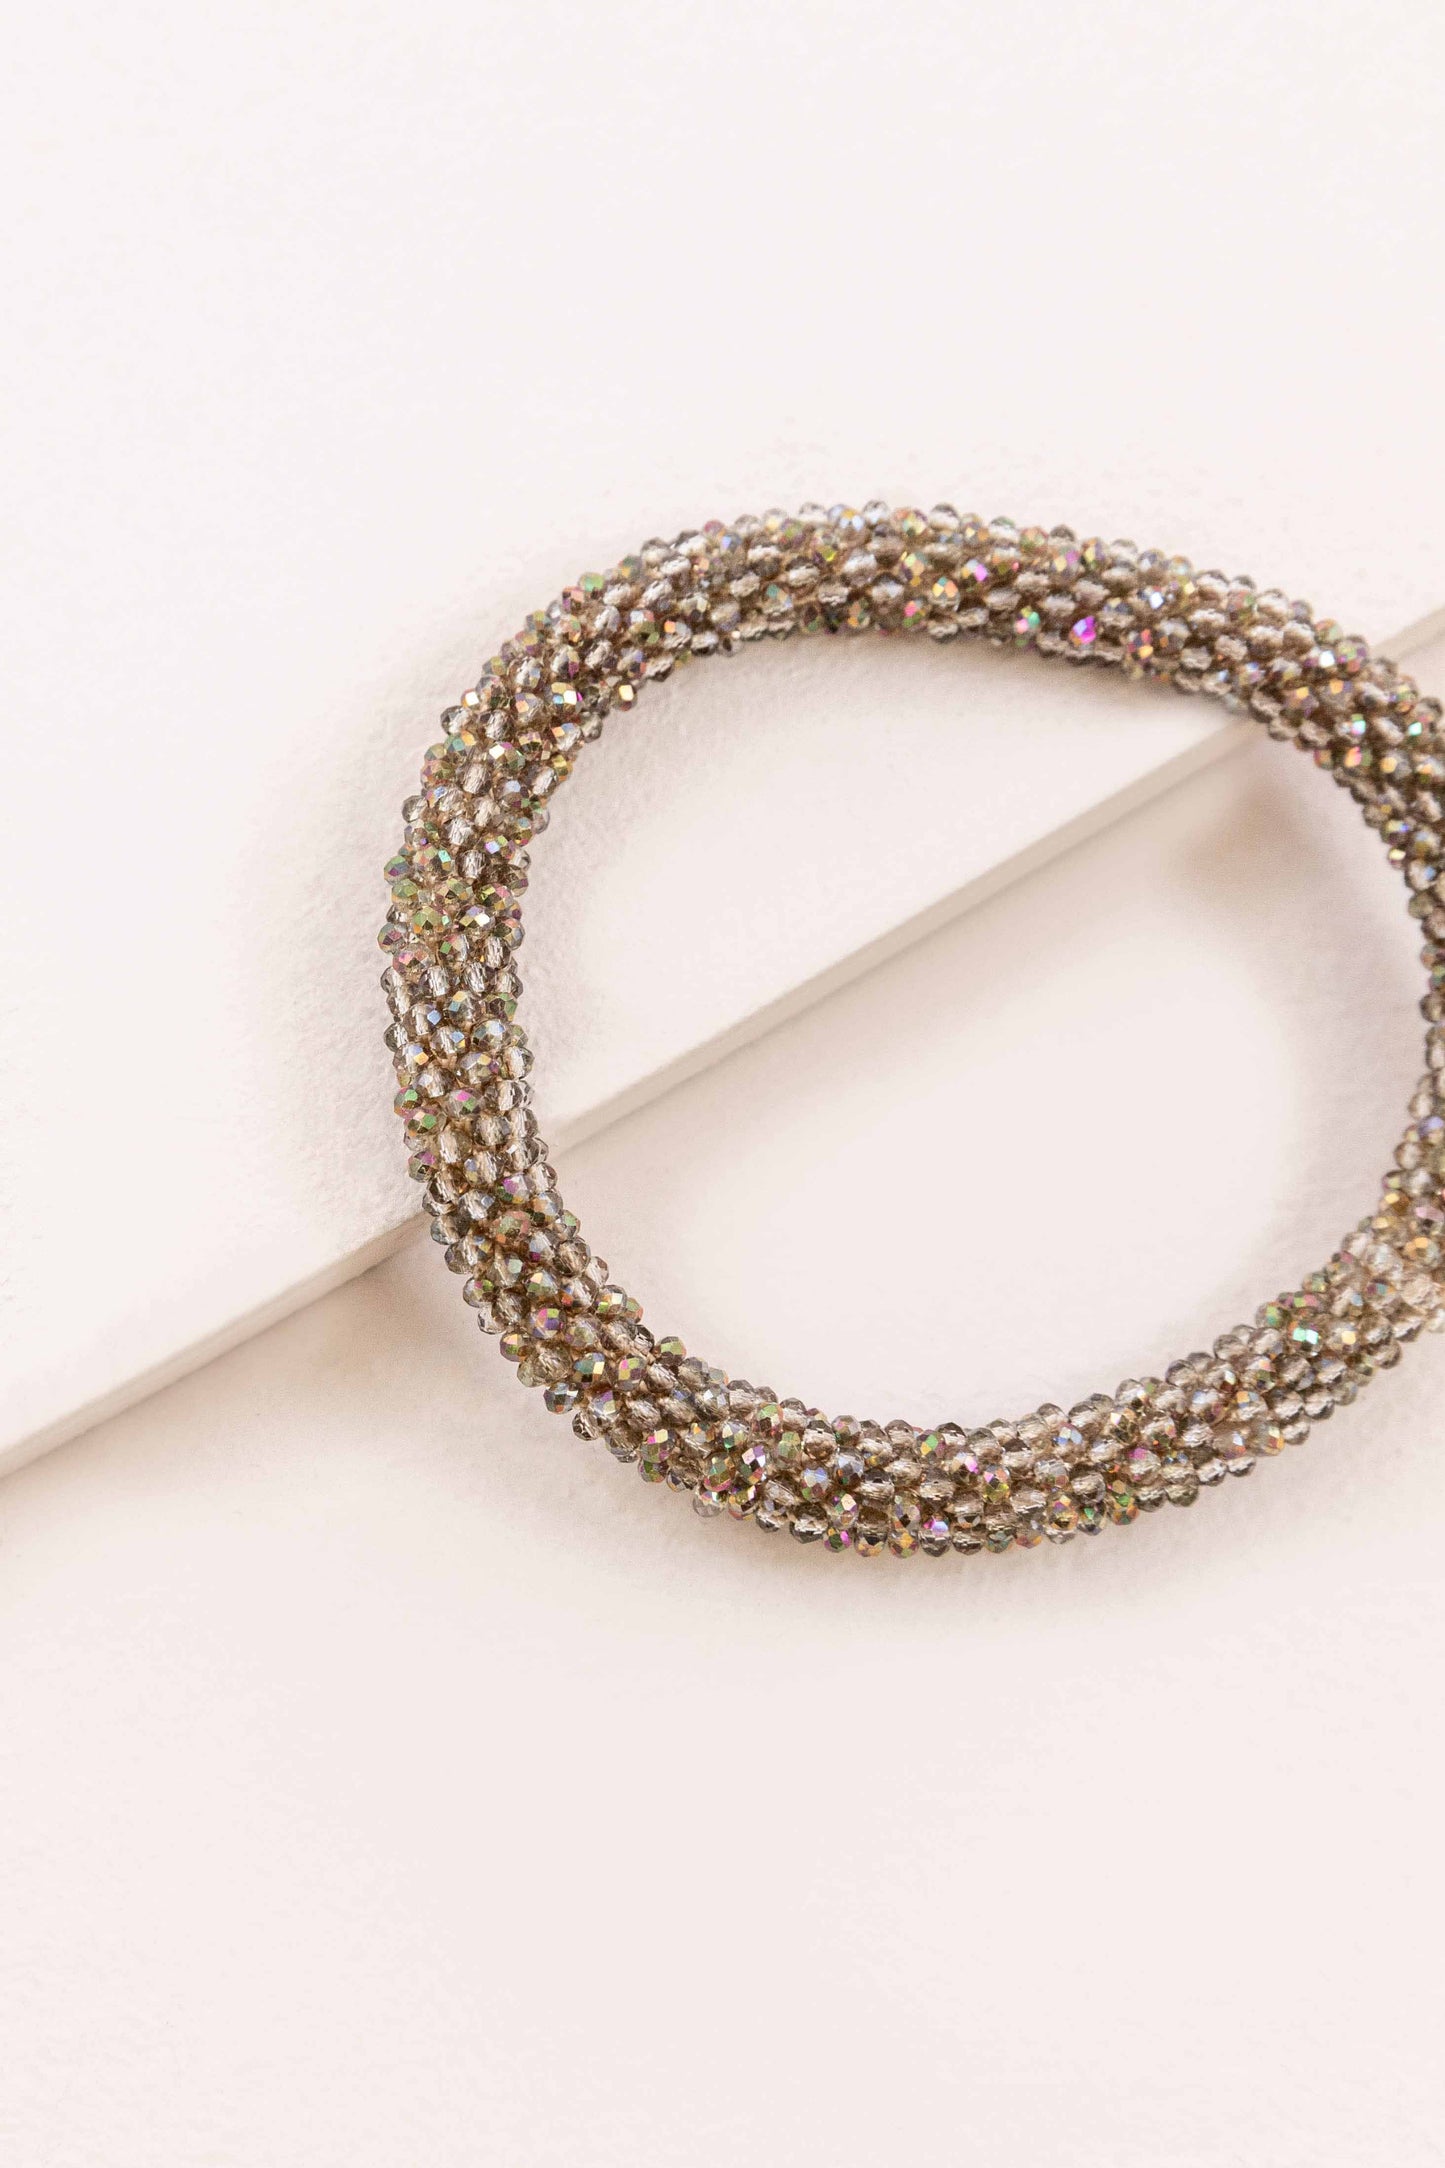 Thin Beaded Rope Bracelet | Speckled Brown